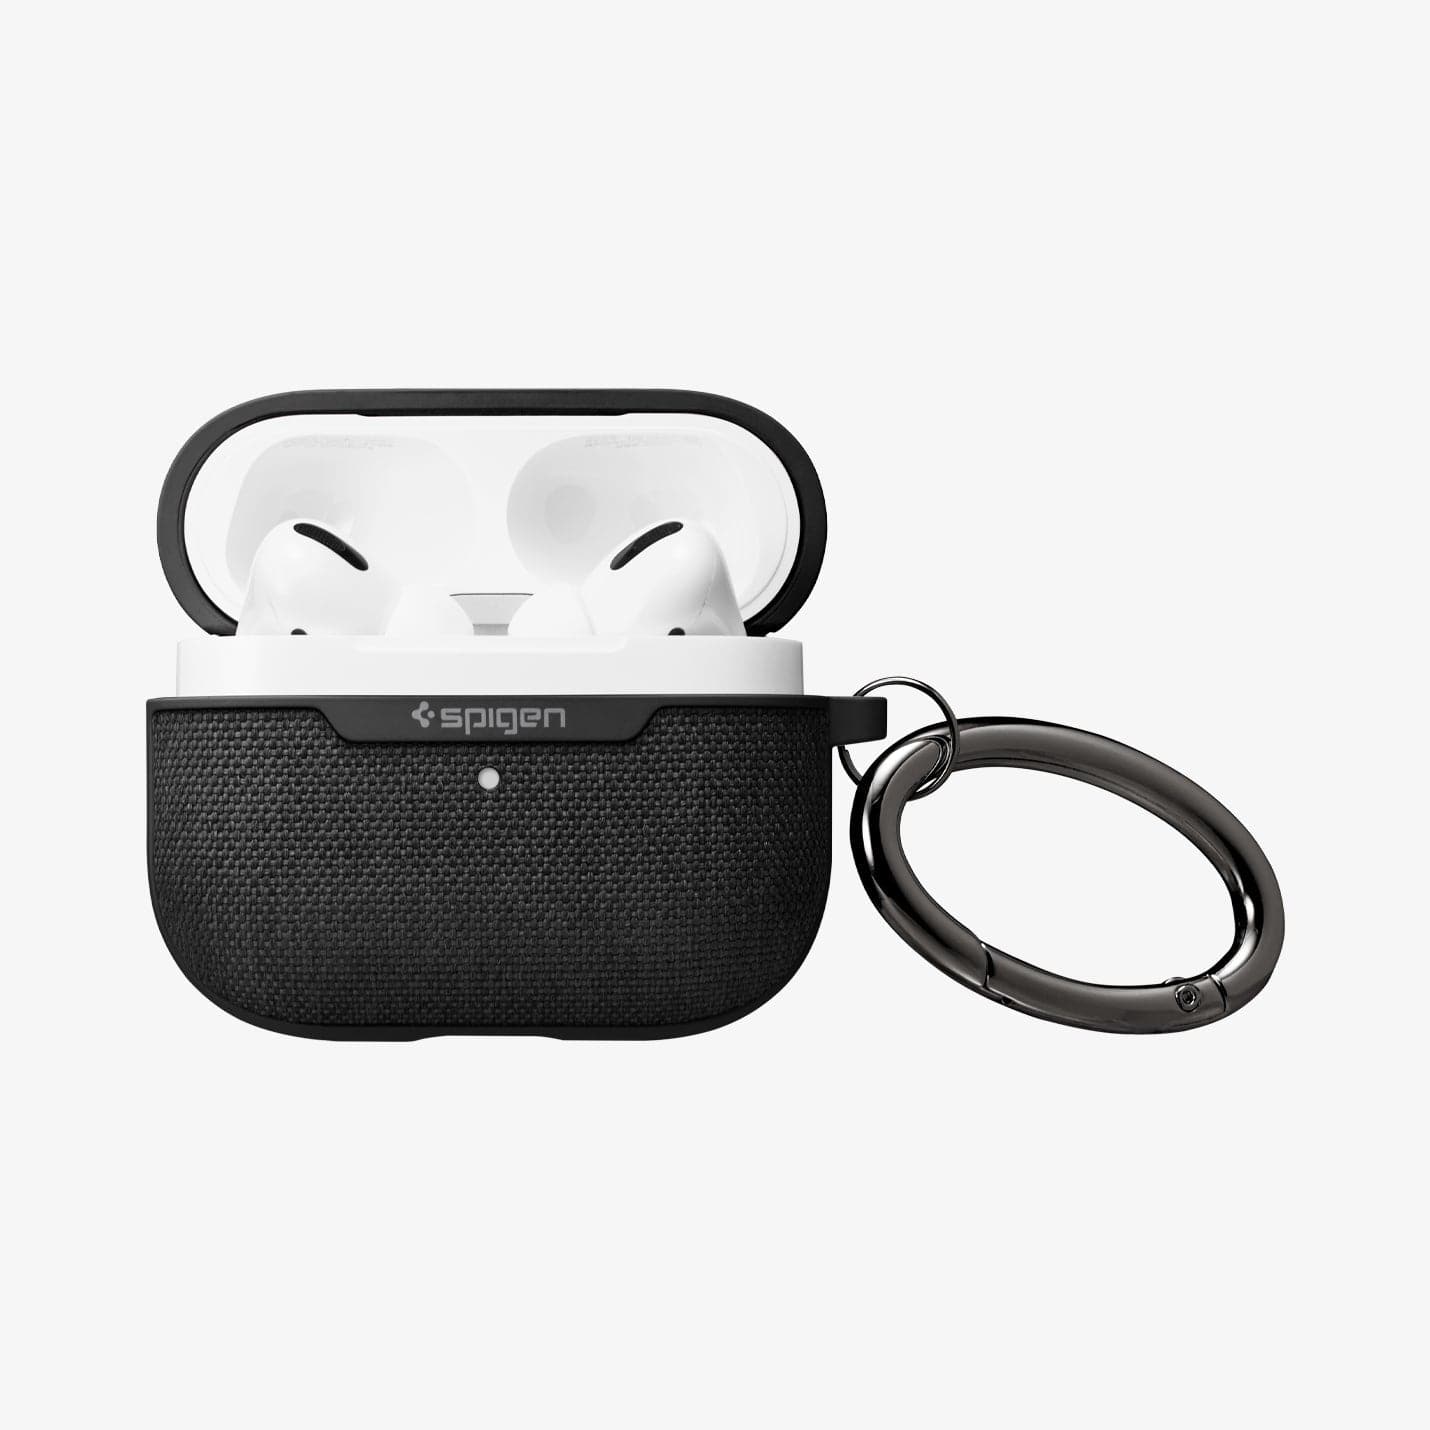 ASD00572 - Apple AirPods Pro Case Urban Fit in black showing the front, carabiner and top open with AirPods inside